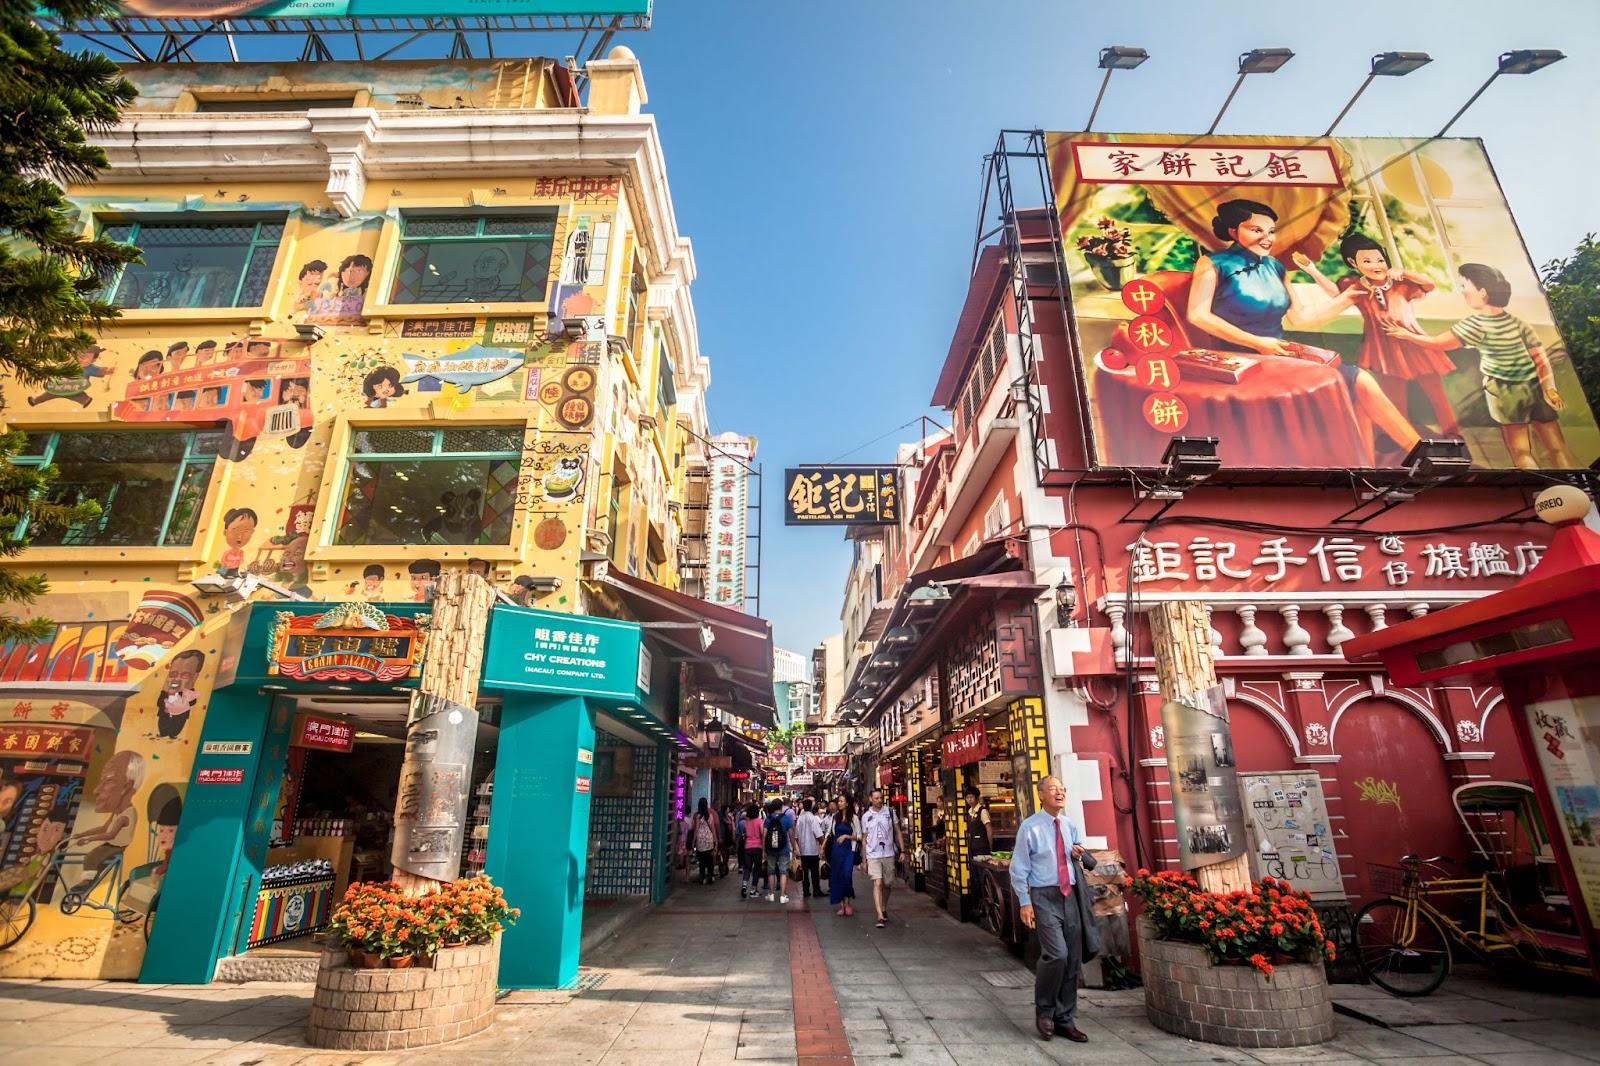 Macau, Macau S.A.R. - September 19, 2015: Tourists and shoppers walking along a narrow street with colourful building in central Macau with many shops and restaurants.